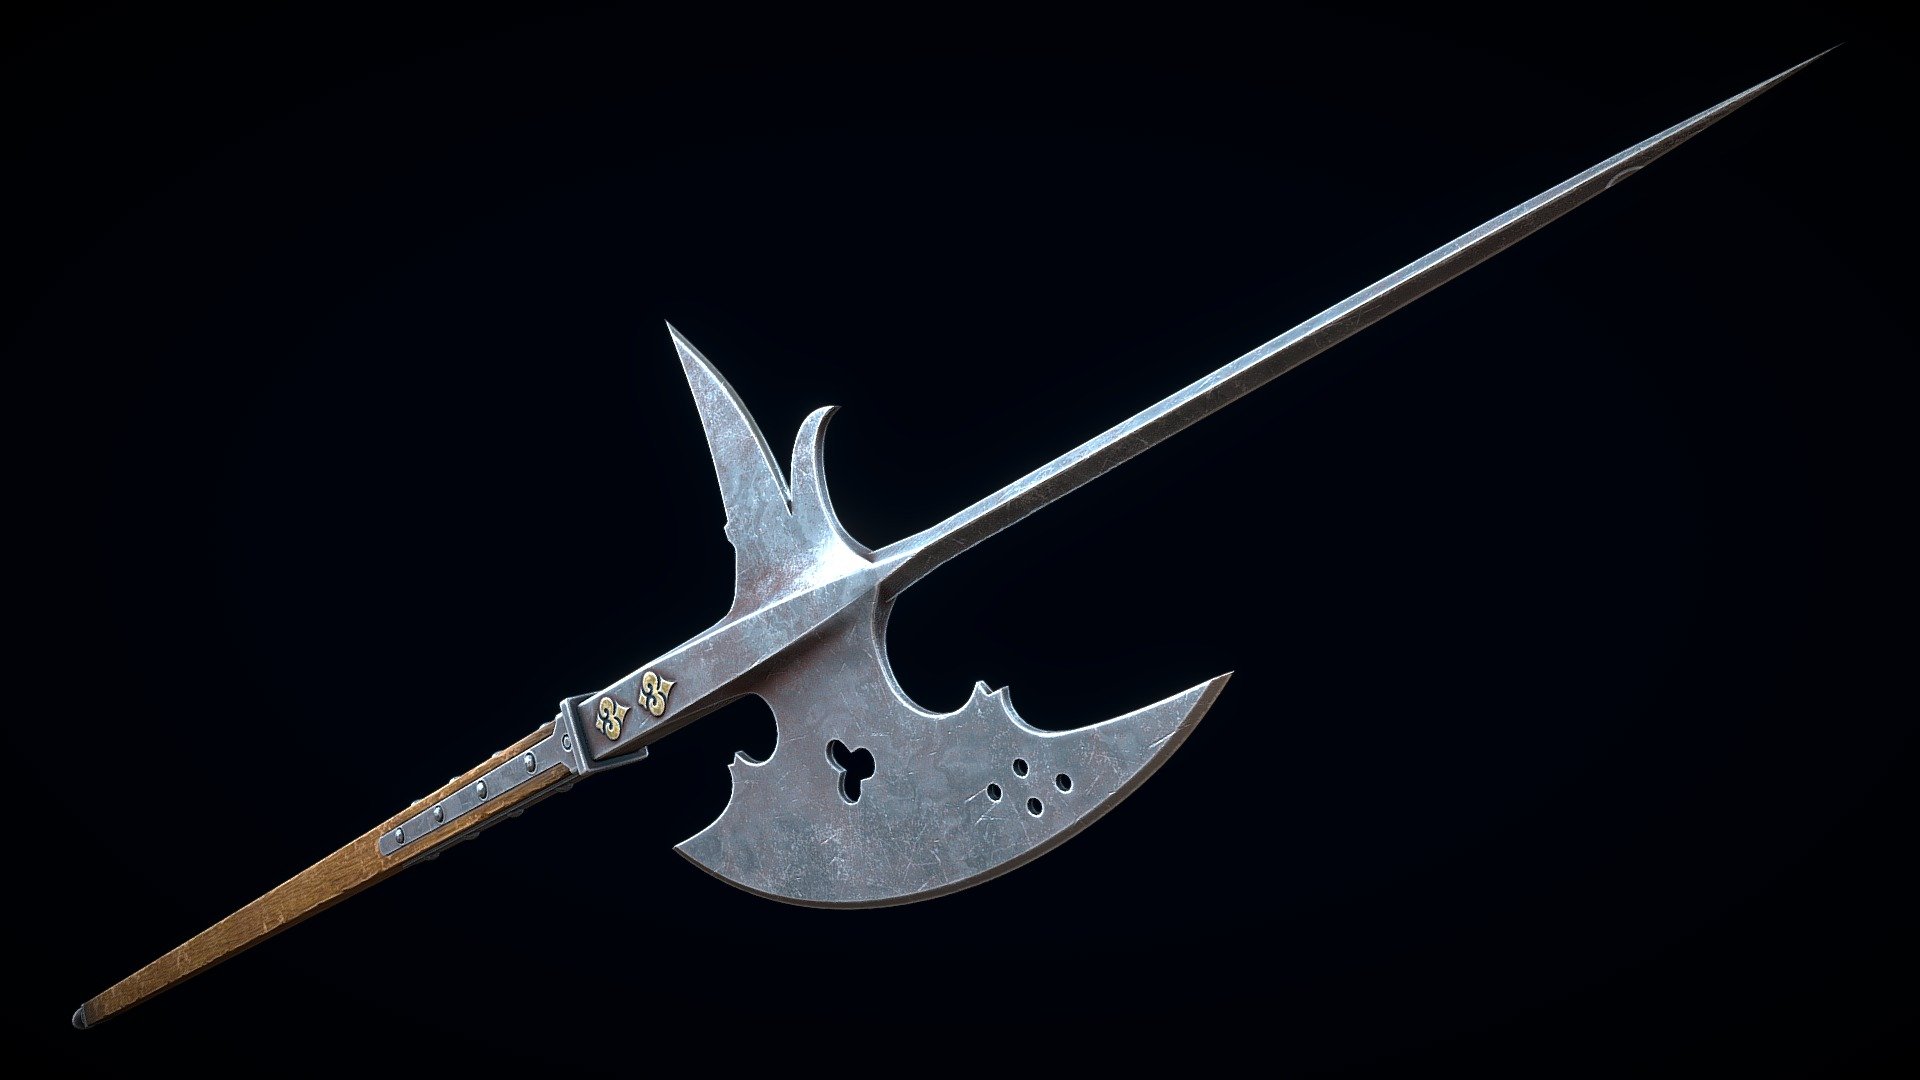 Low-poly 3D model of a Medieval Halberd doesn't contain any n-gons and has optimal topology. This model has 2K textures 3d model